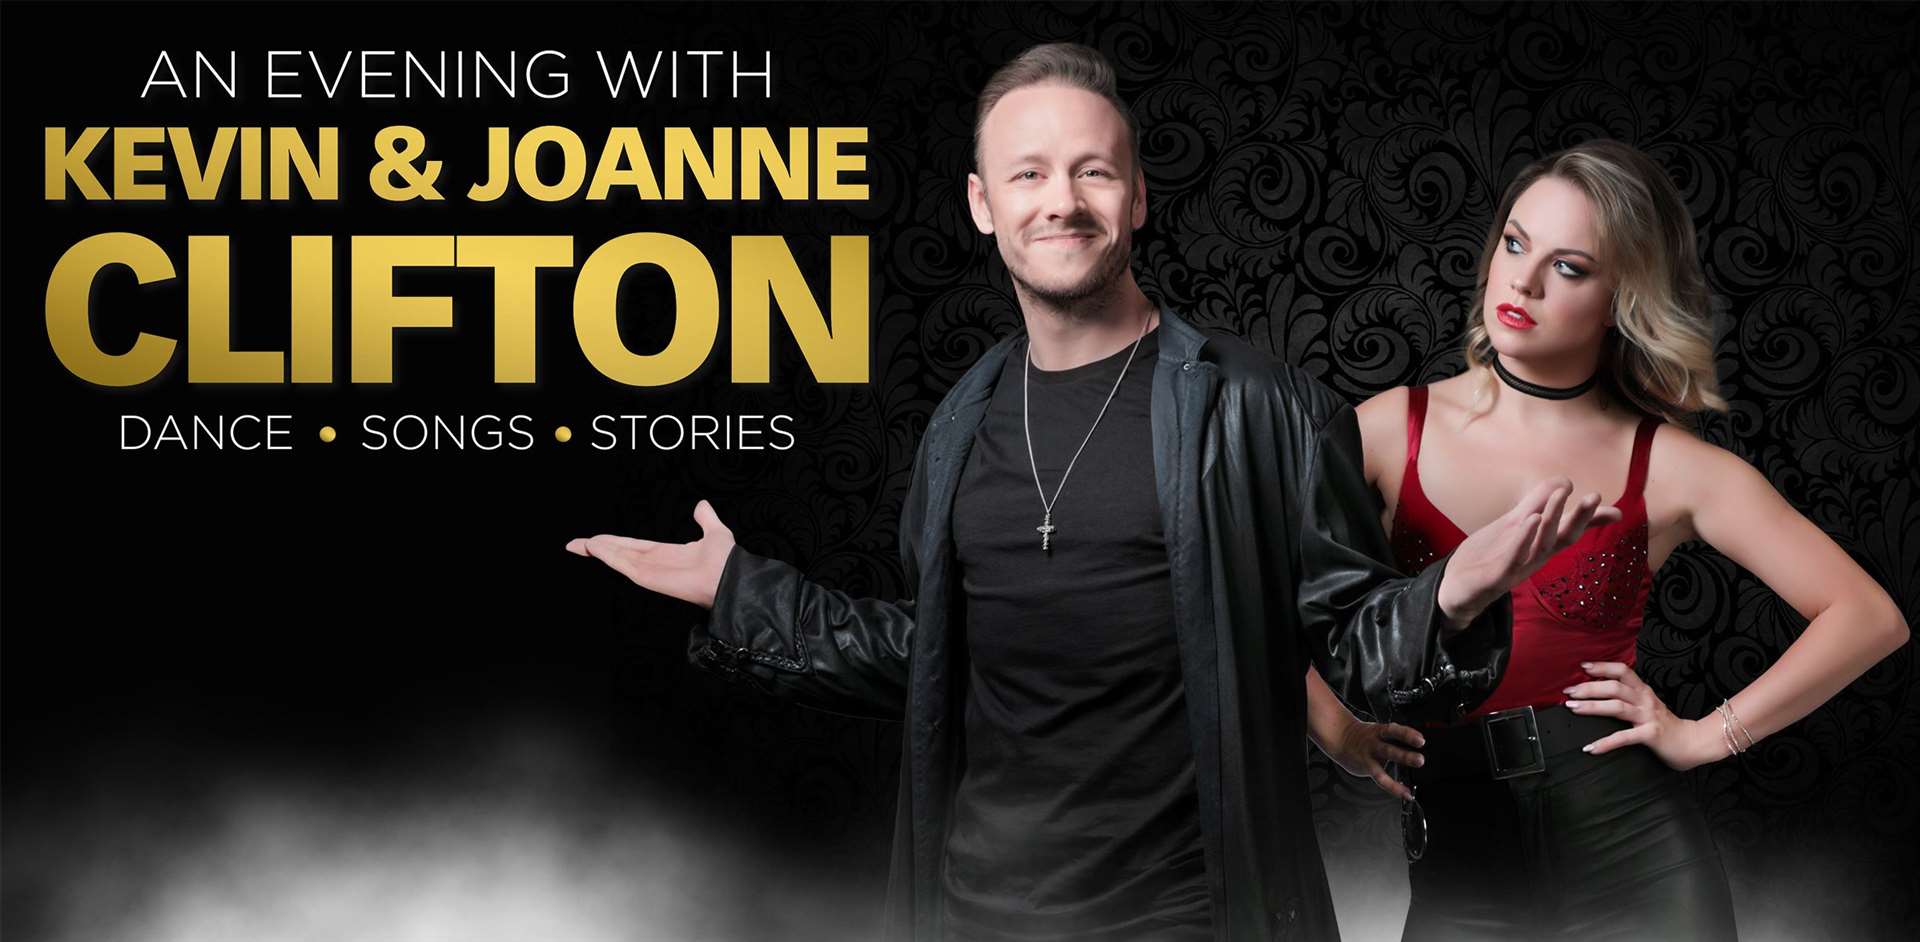 An Evening with Kevin and Joanne Clifton is coming to Tunbridge Wells